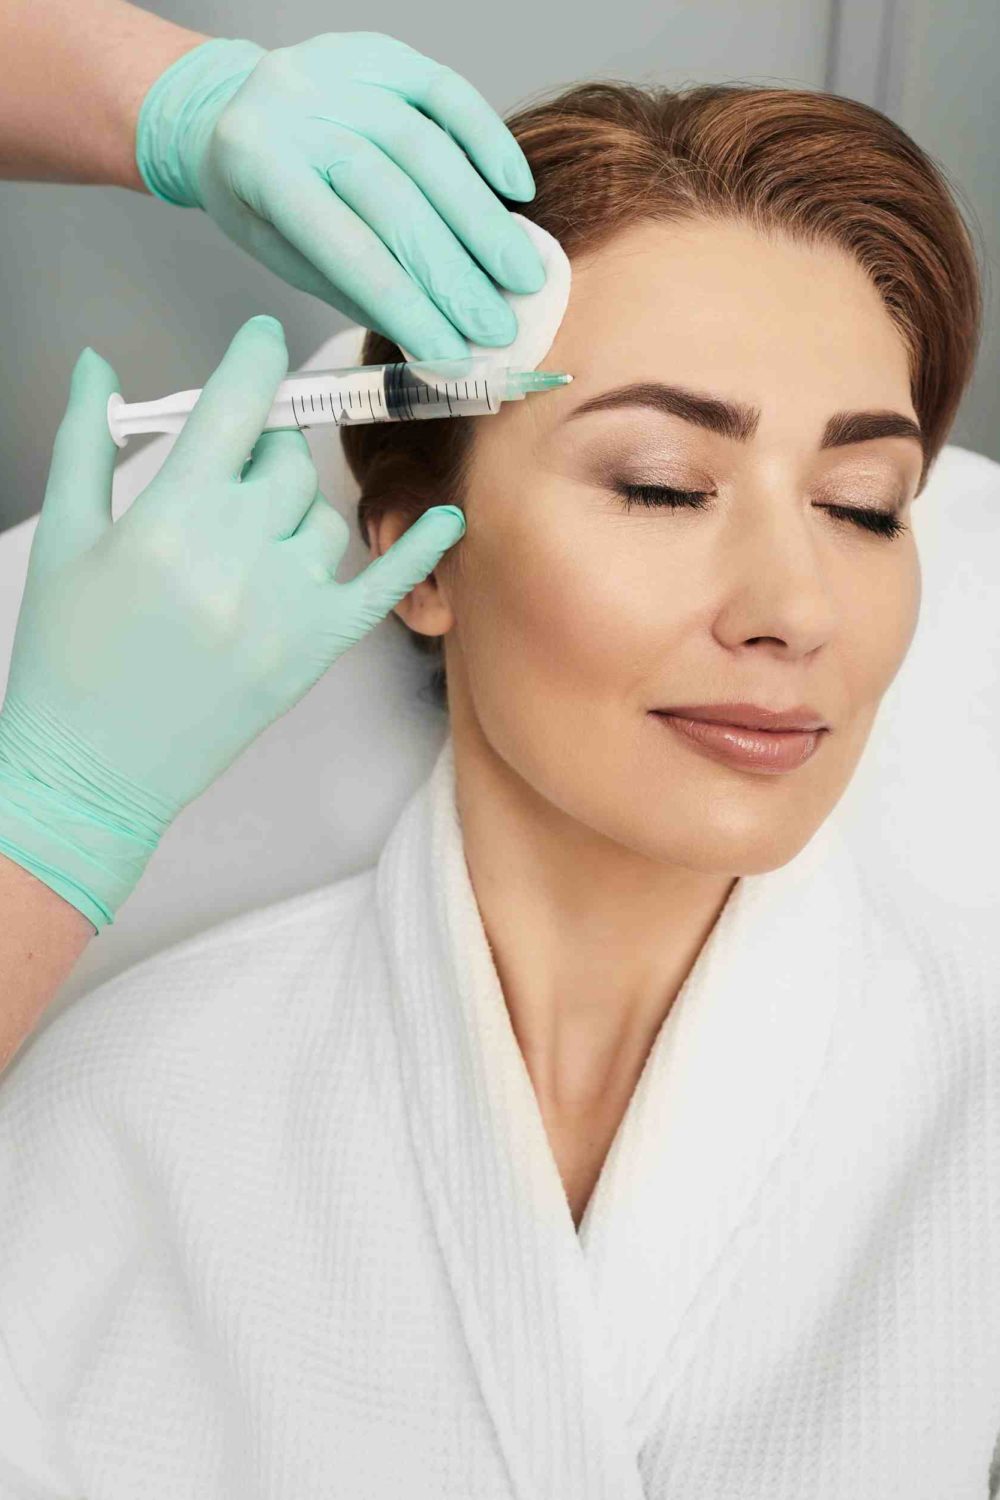 5 Aesthetic Injectable Treatments For Anti-Aging